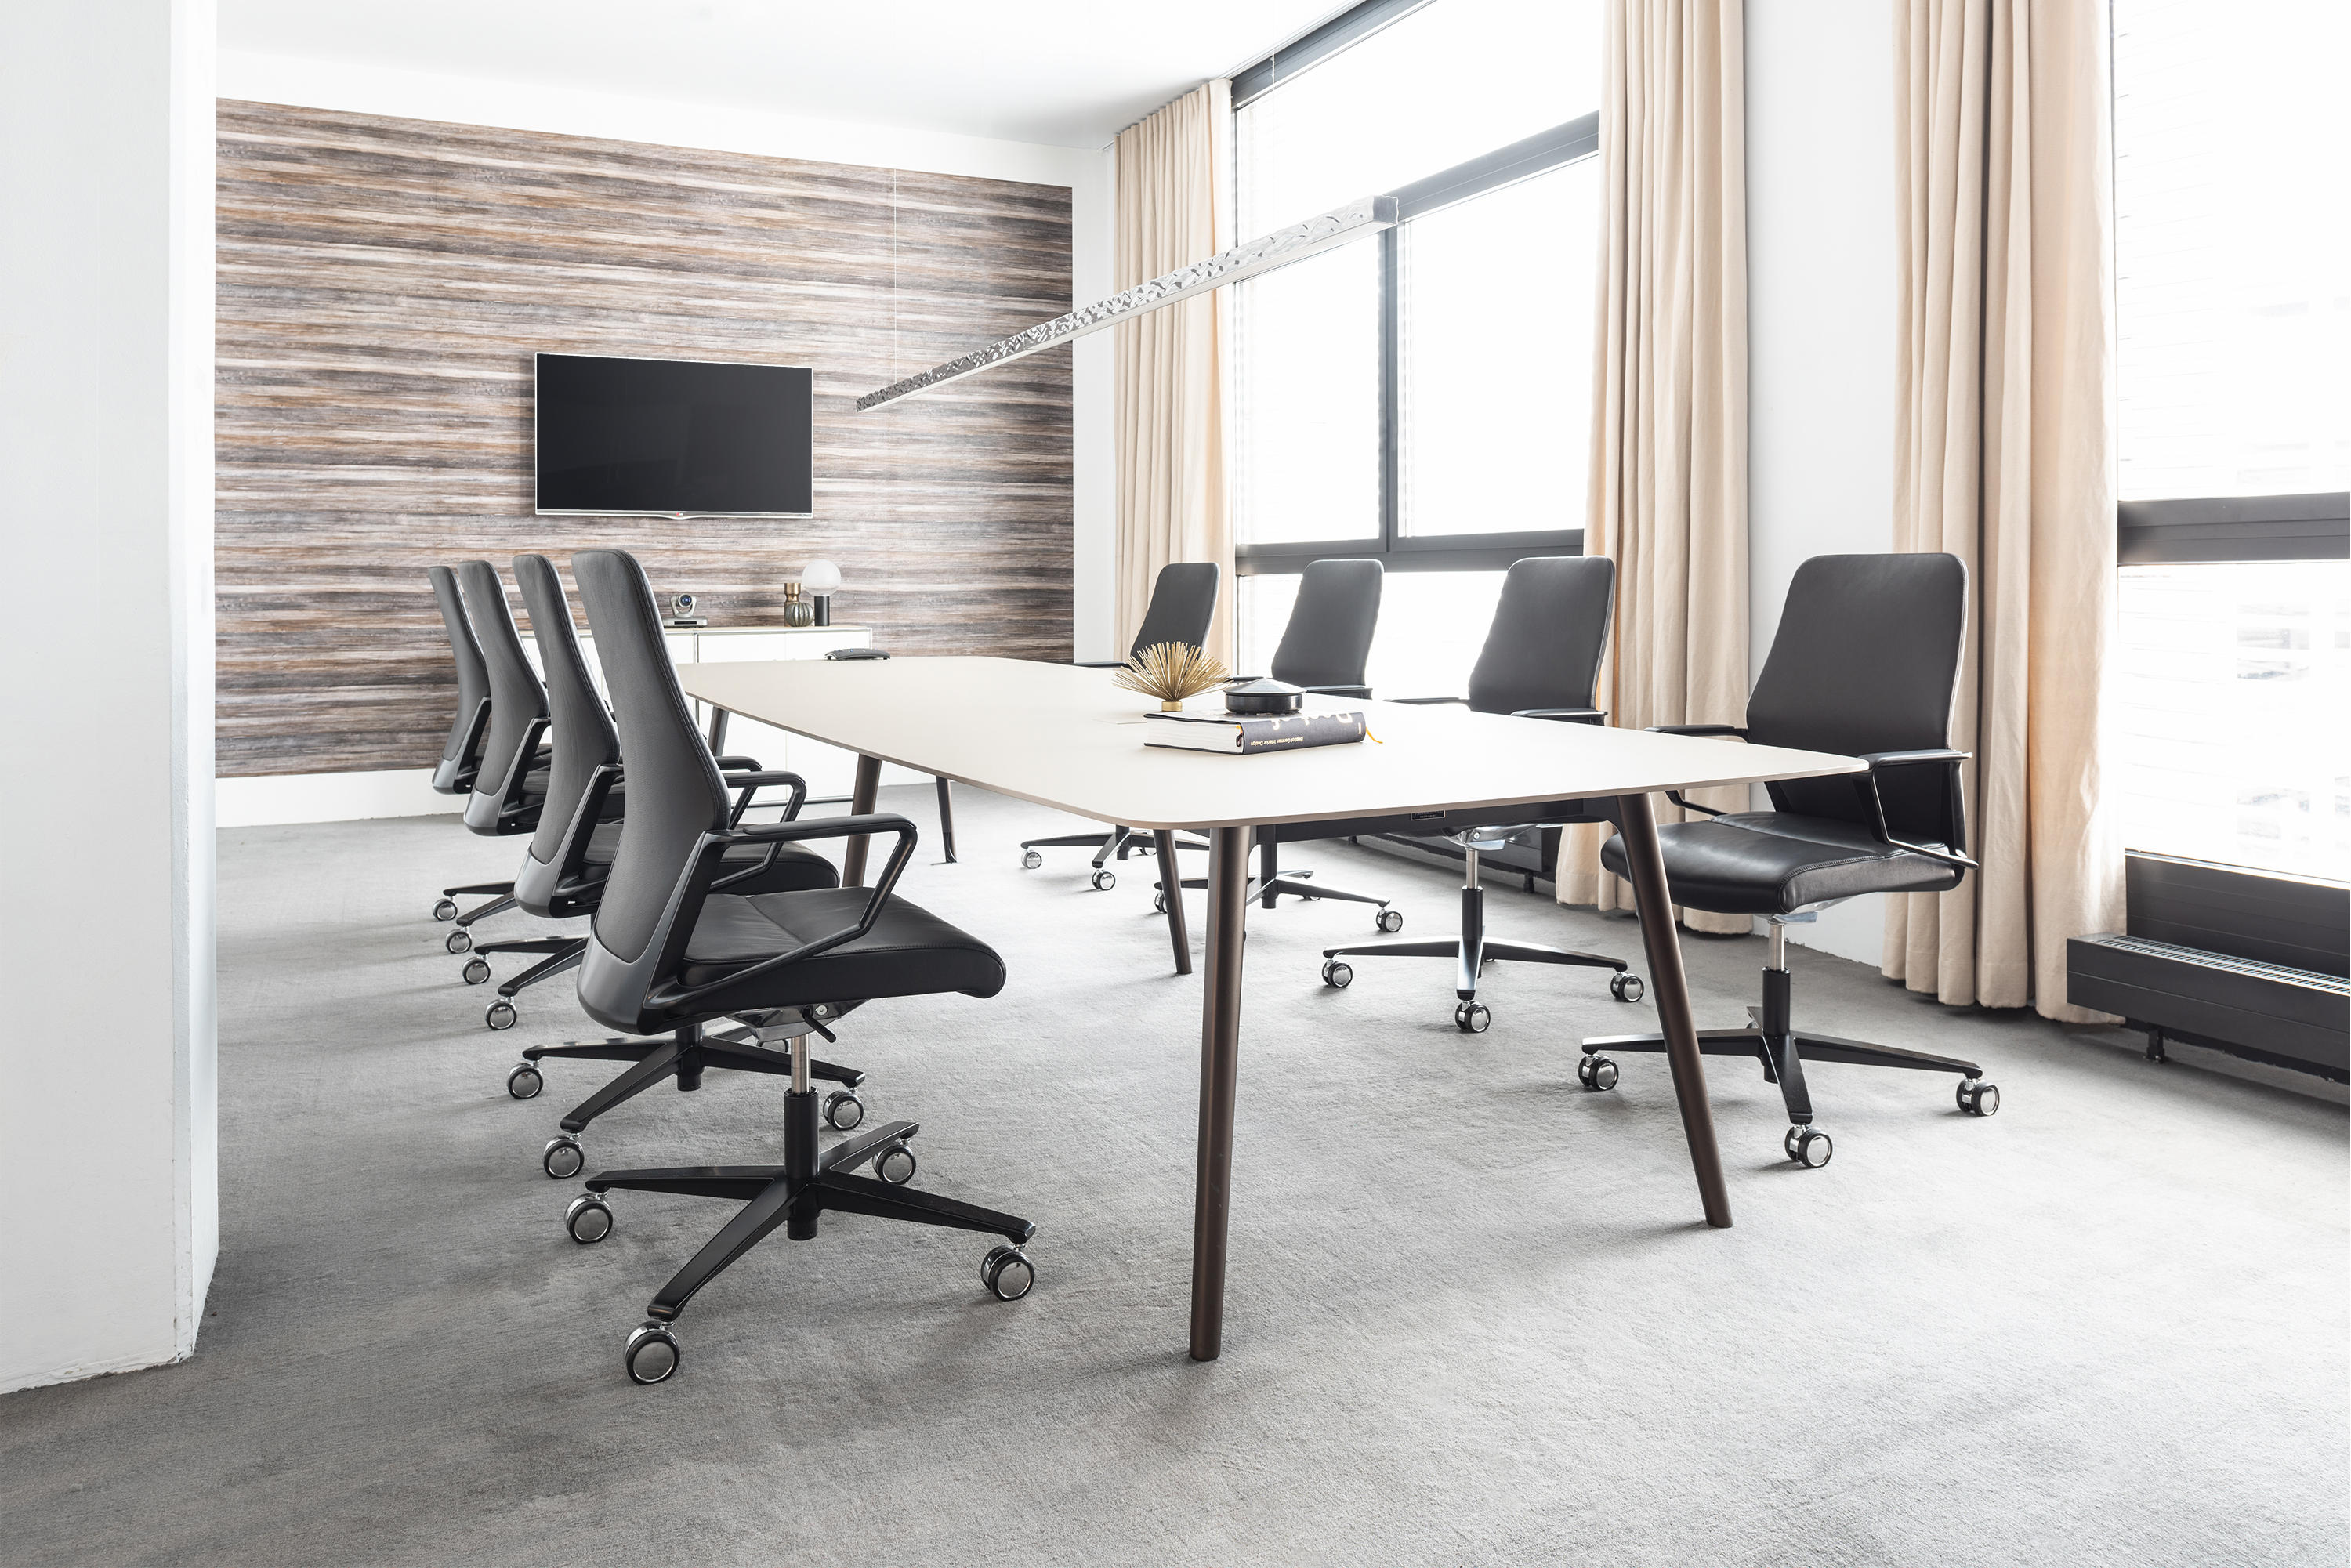 SIGNO | SG 202 - Office chairs from Züco | Architonic